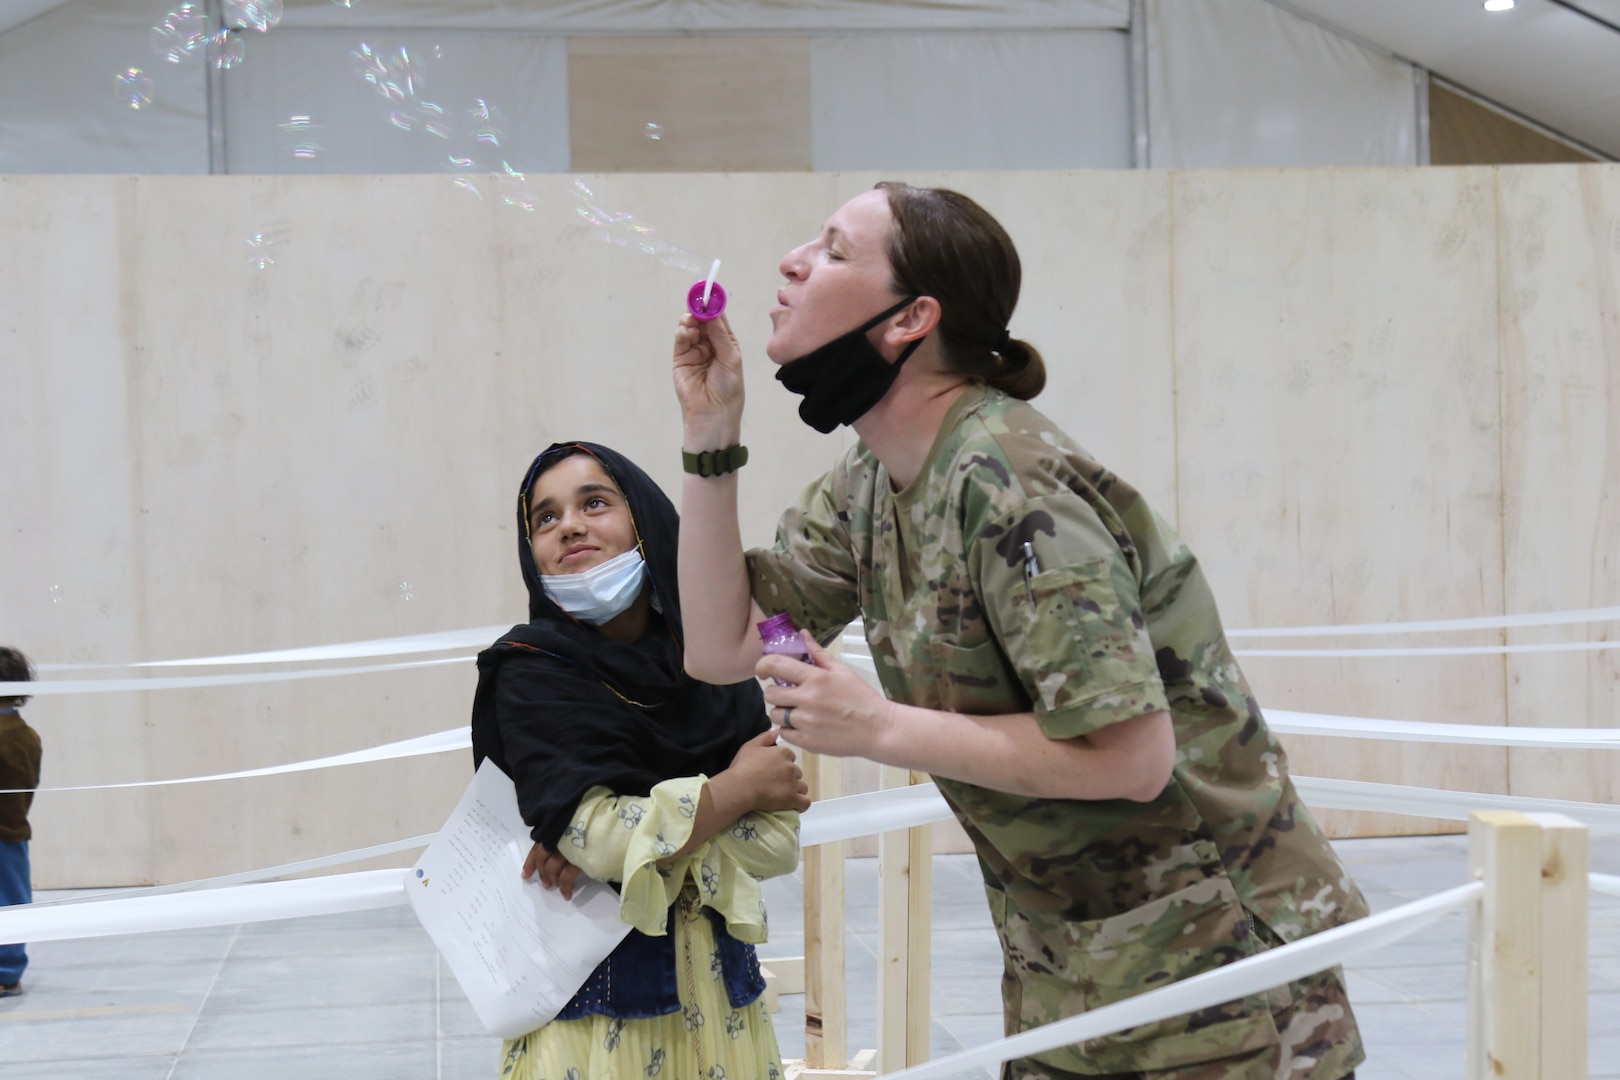 A U.S. Army National Guard Soldier with Task Force Spartan, U.S. Army Central, entertains an Afghan girl with bubbles as she waits to in-process at Camp Buehring, Kuwait, Aug. 23, 2021.